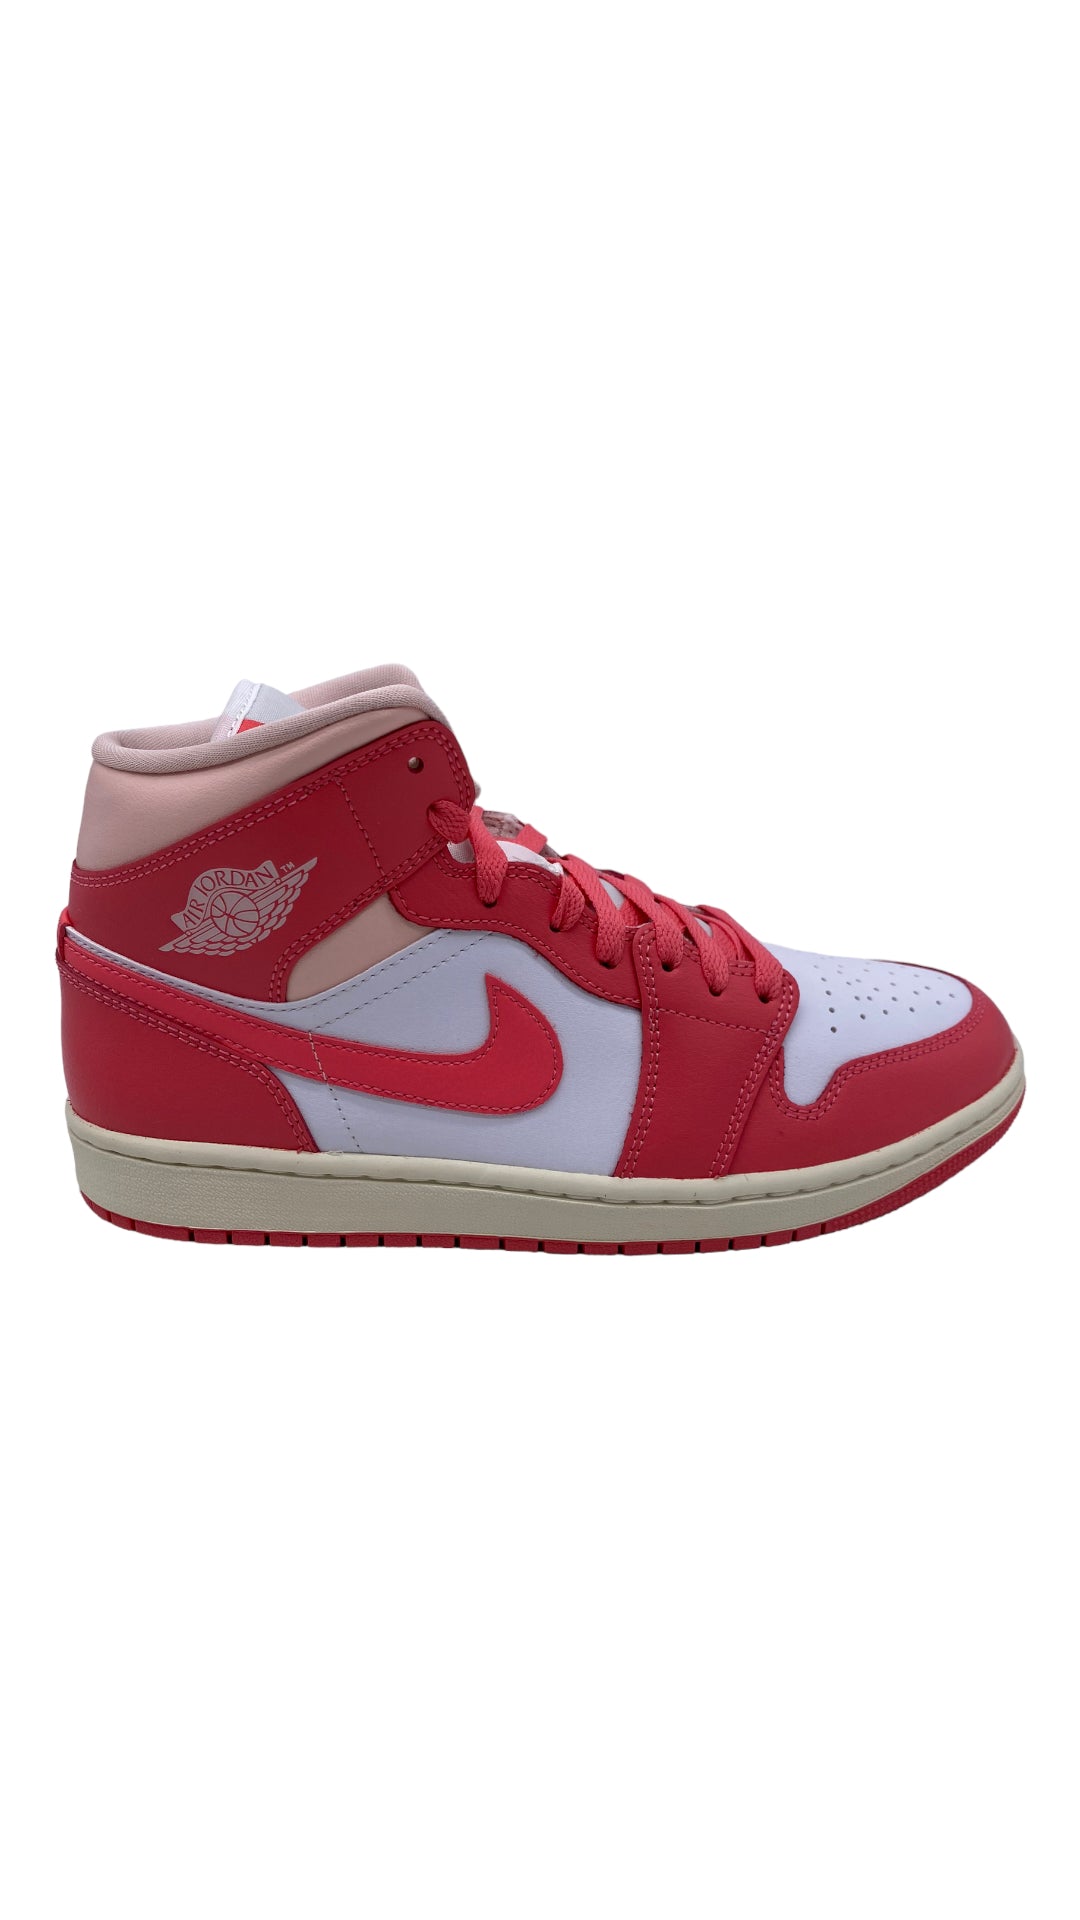 Load image into Gallery viewer, Wmns Jordan 1 Mid Strawberries and Cream Sz 9.5
